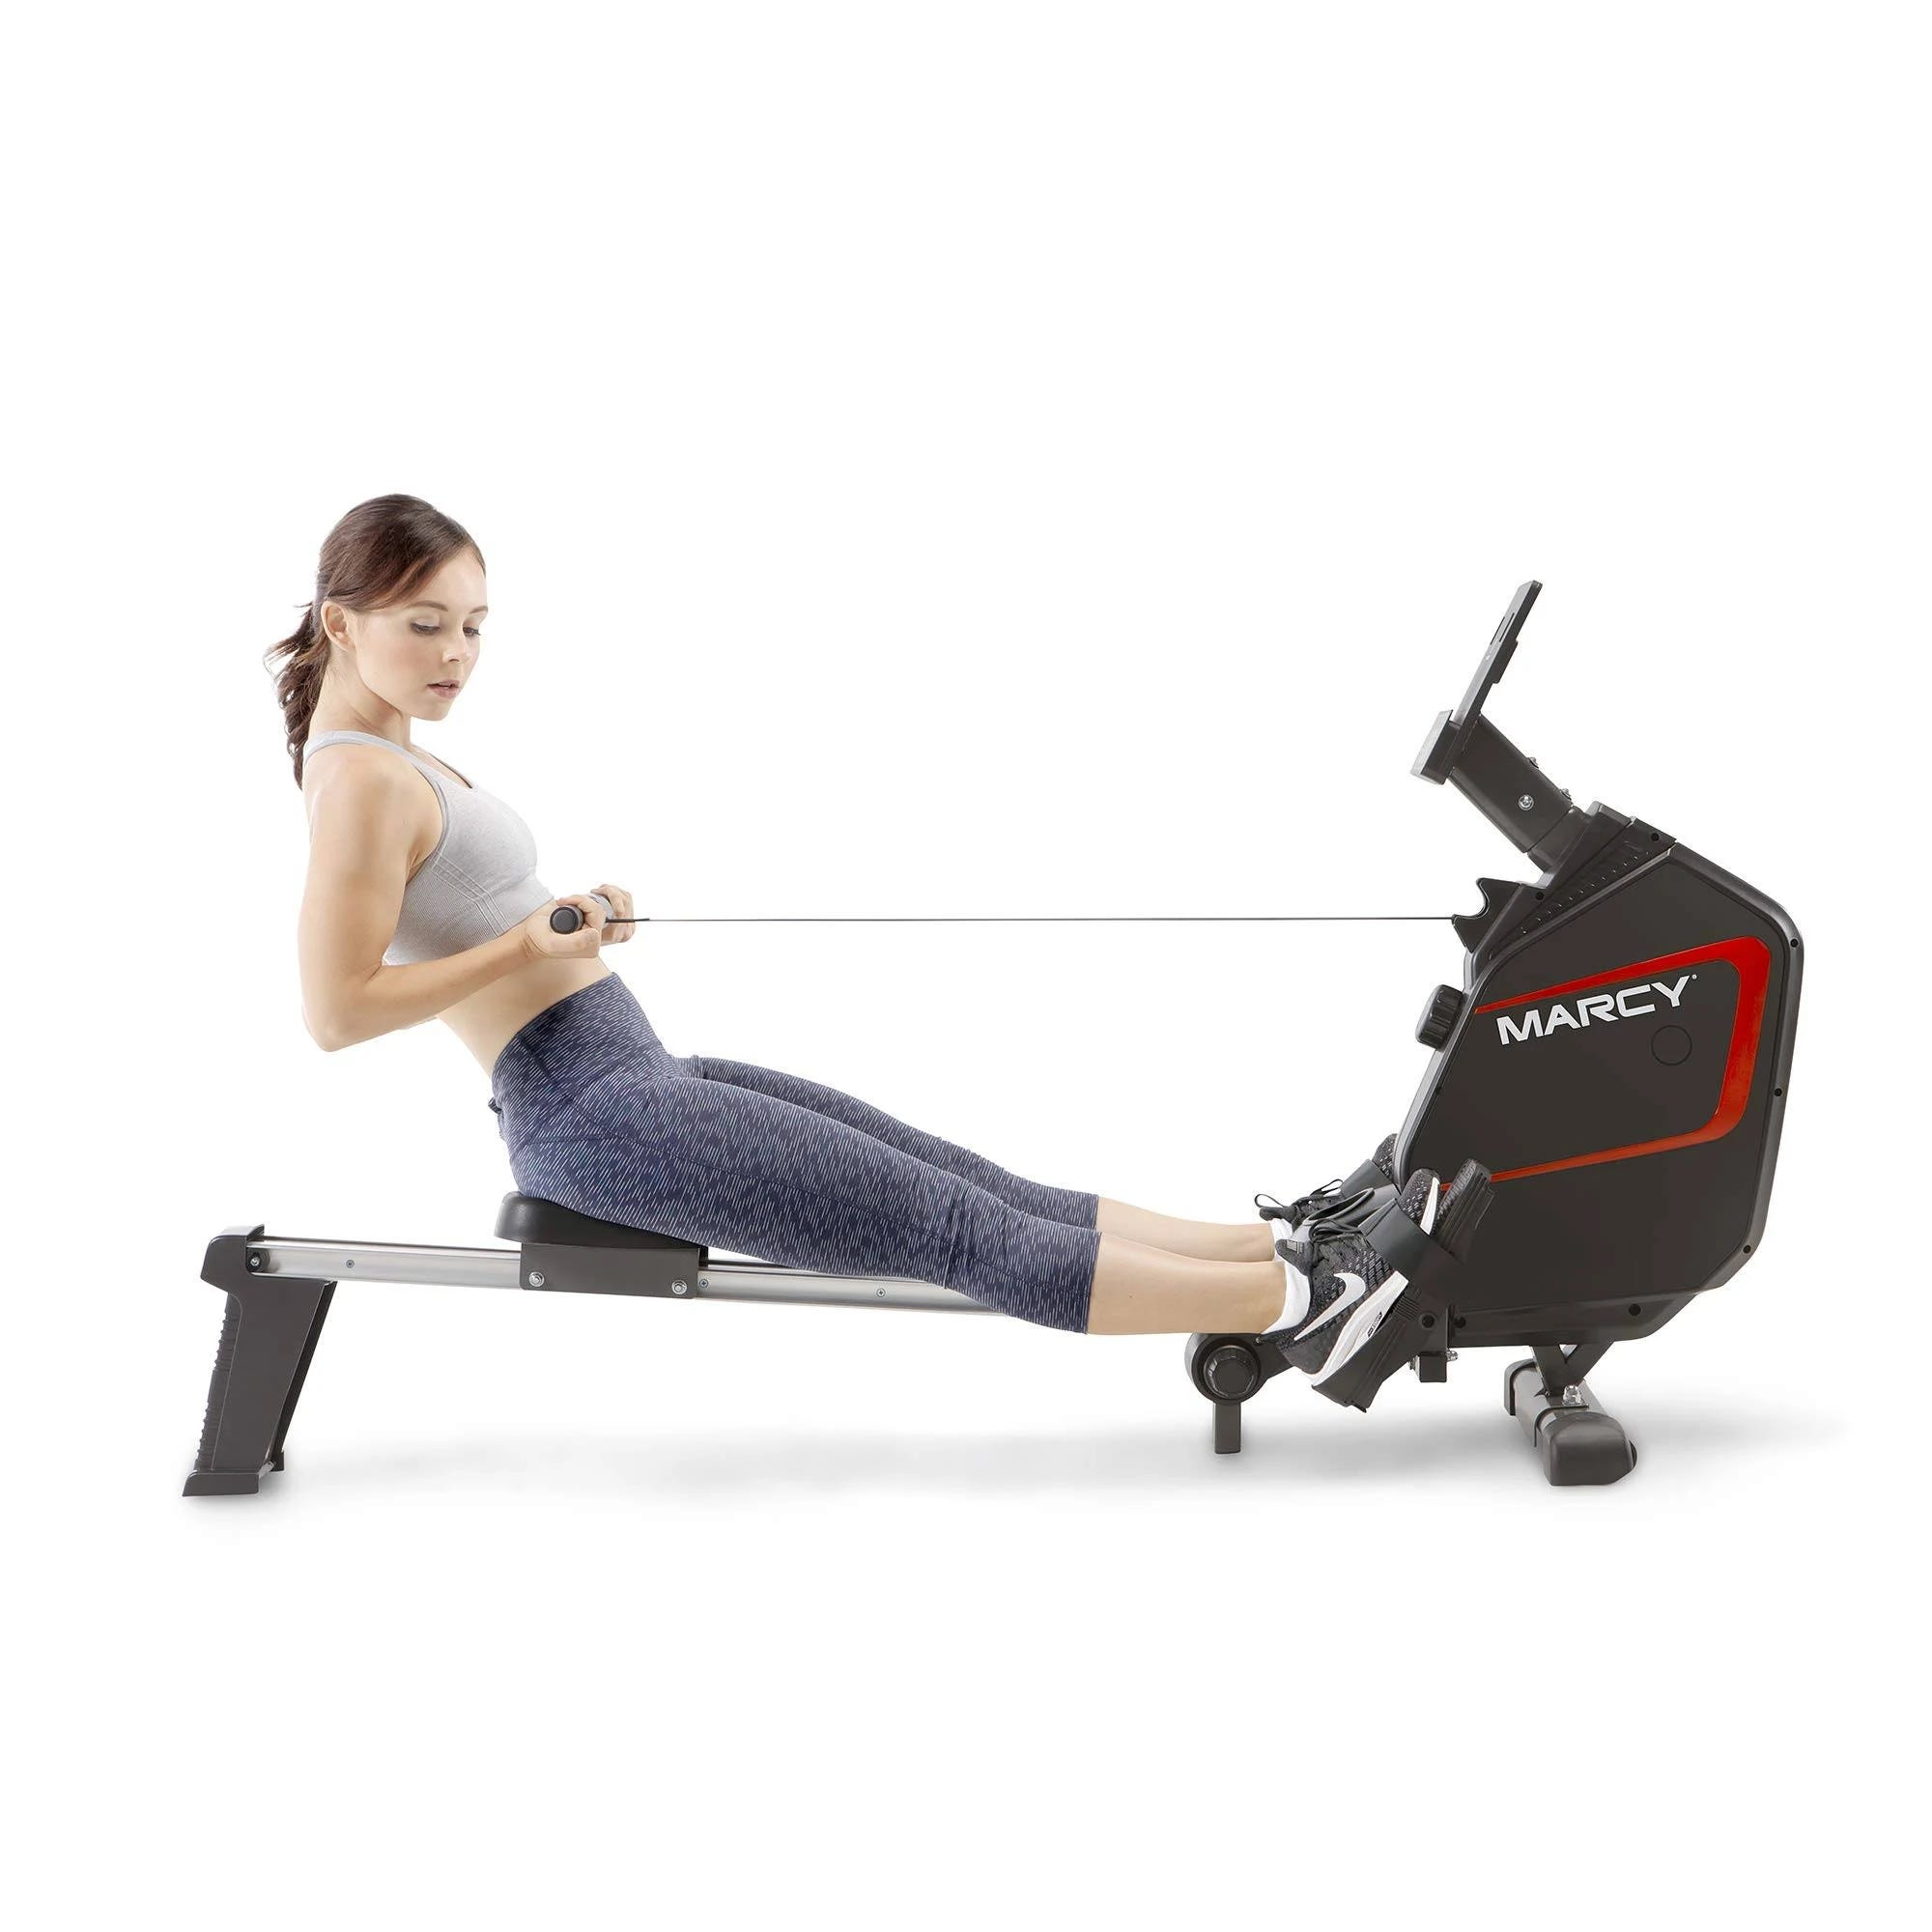 Marcy Magnetic Rowing Machine: Home Gym Essential | Image